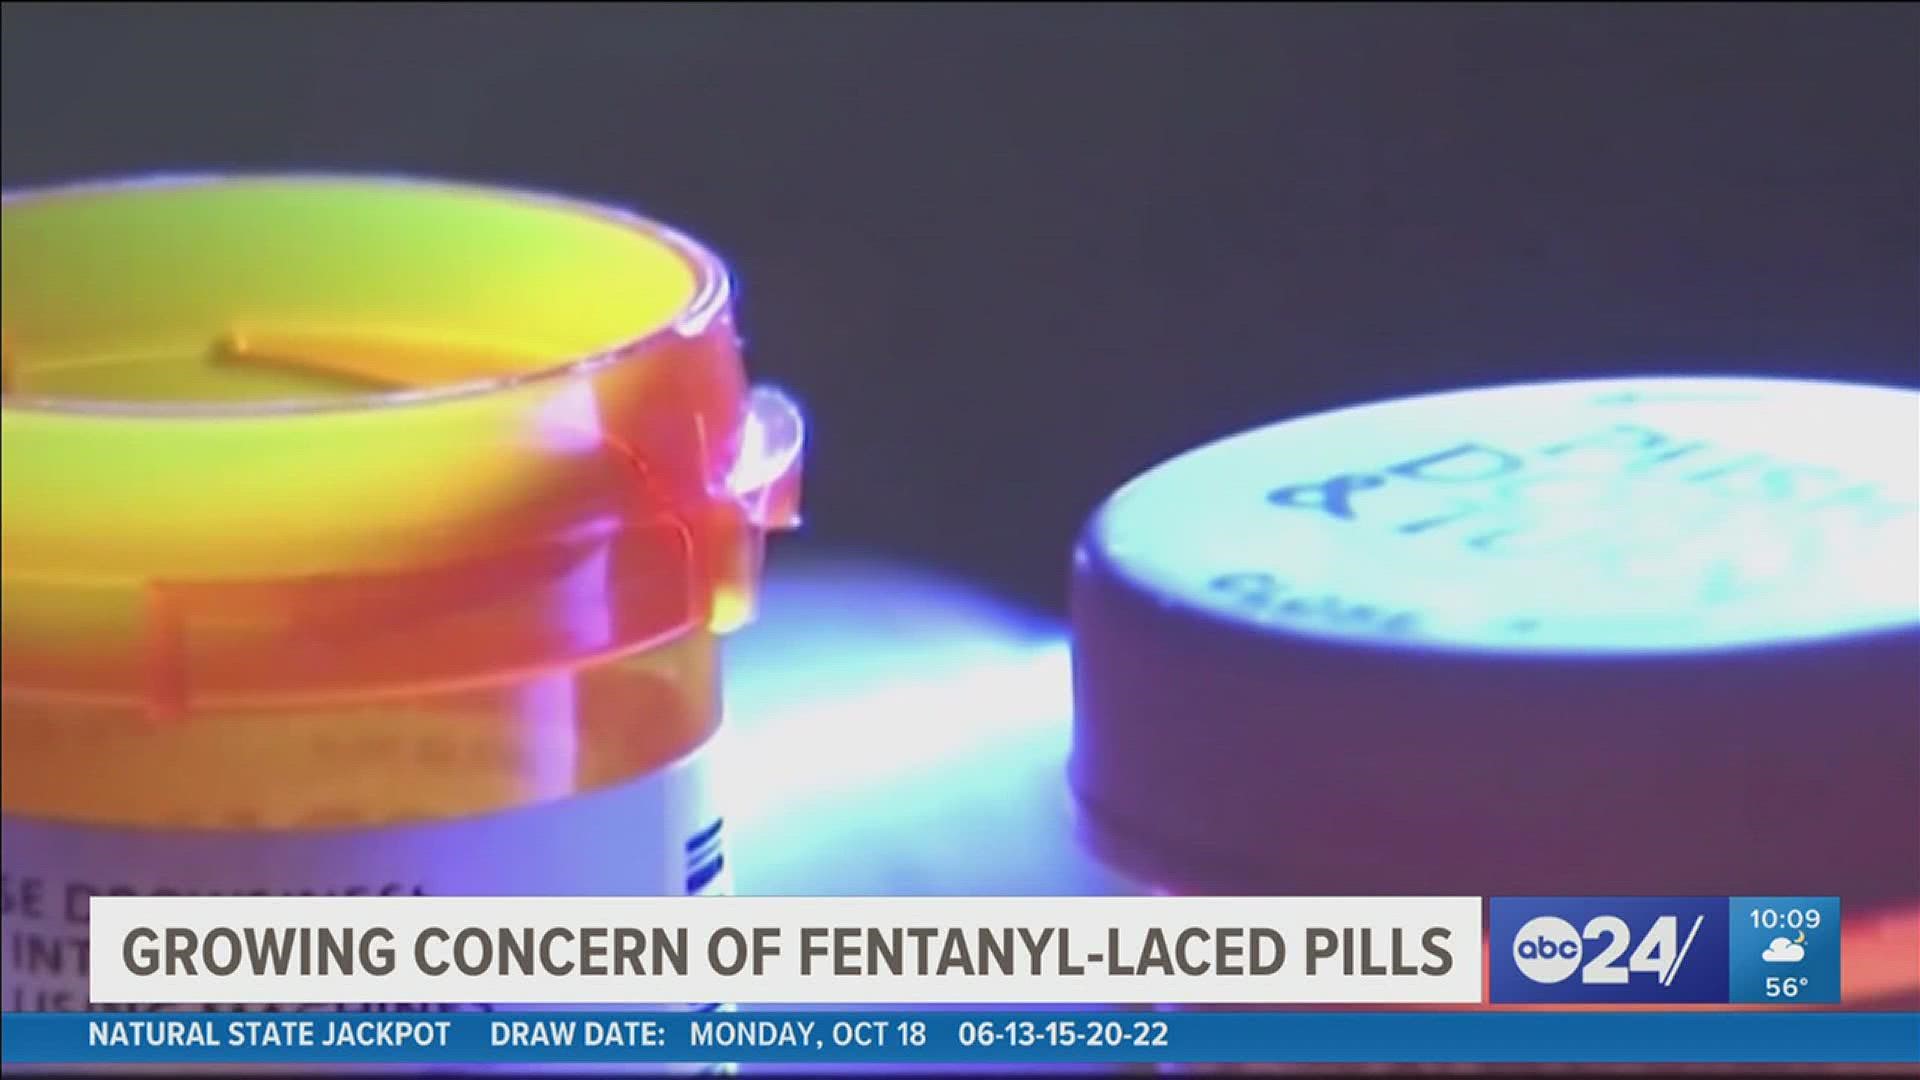 The DEA released a public safety alert on fake pills last month and said Monday 2 out of every 5 pills with fentanyl contain a potentially lethal dose.